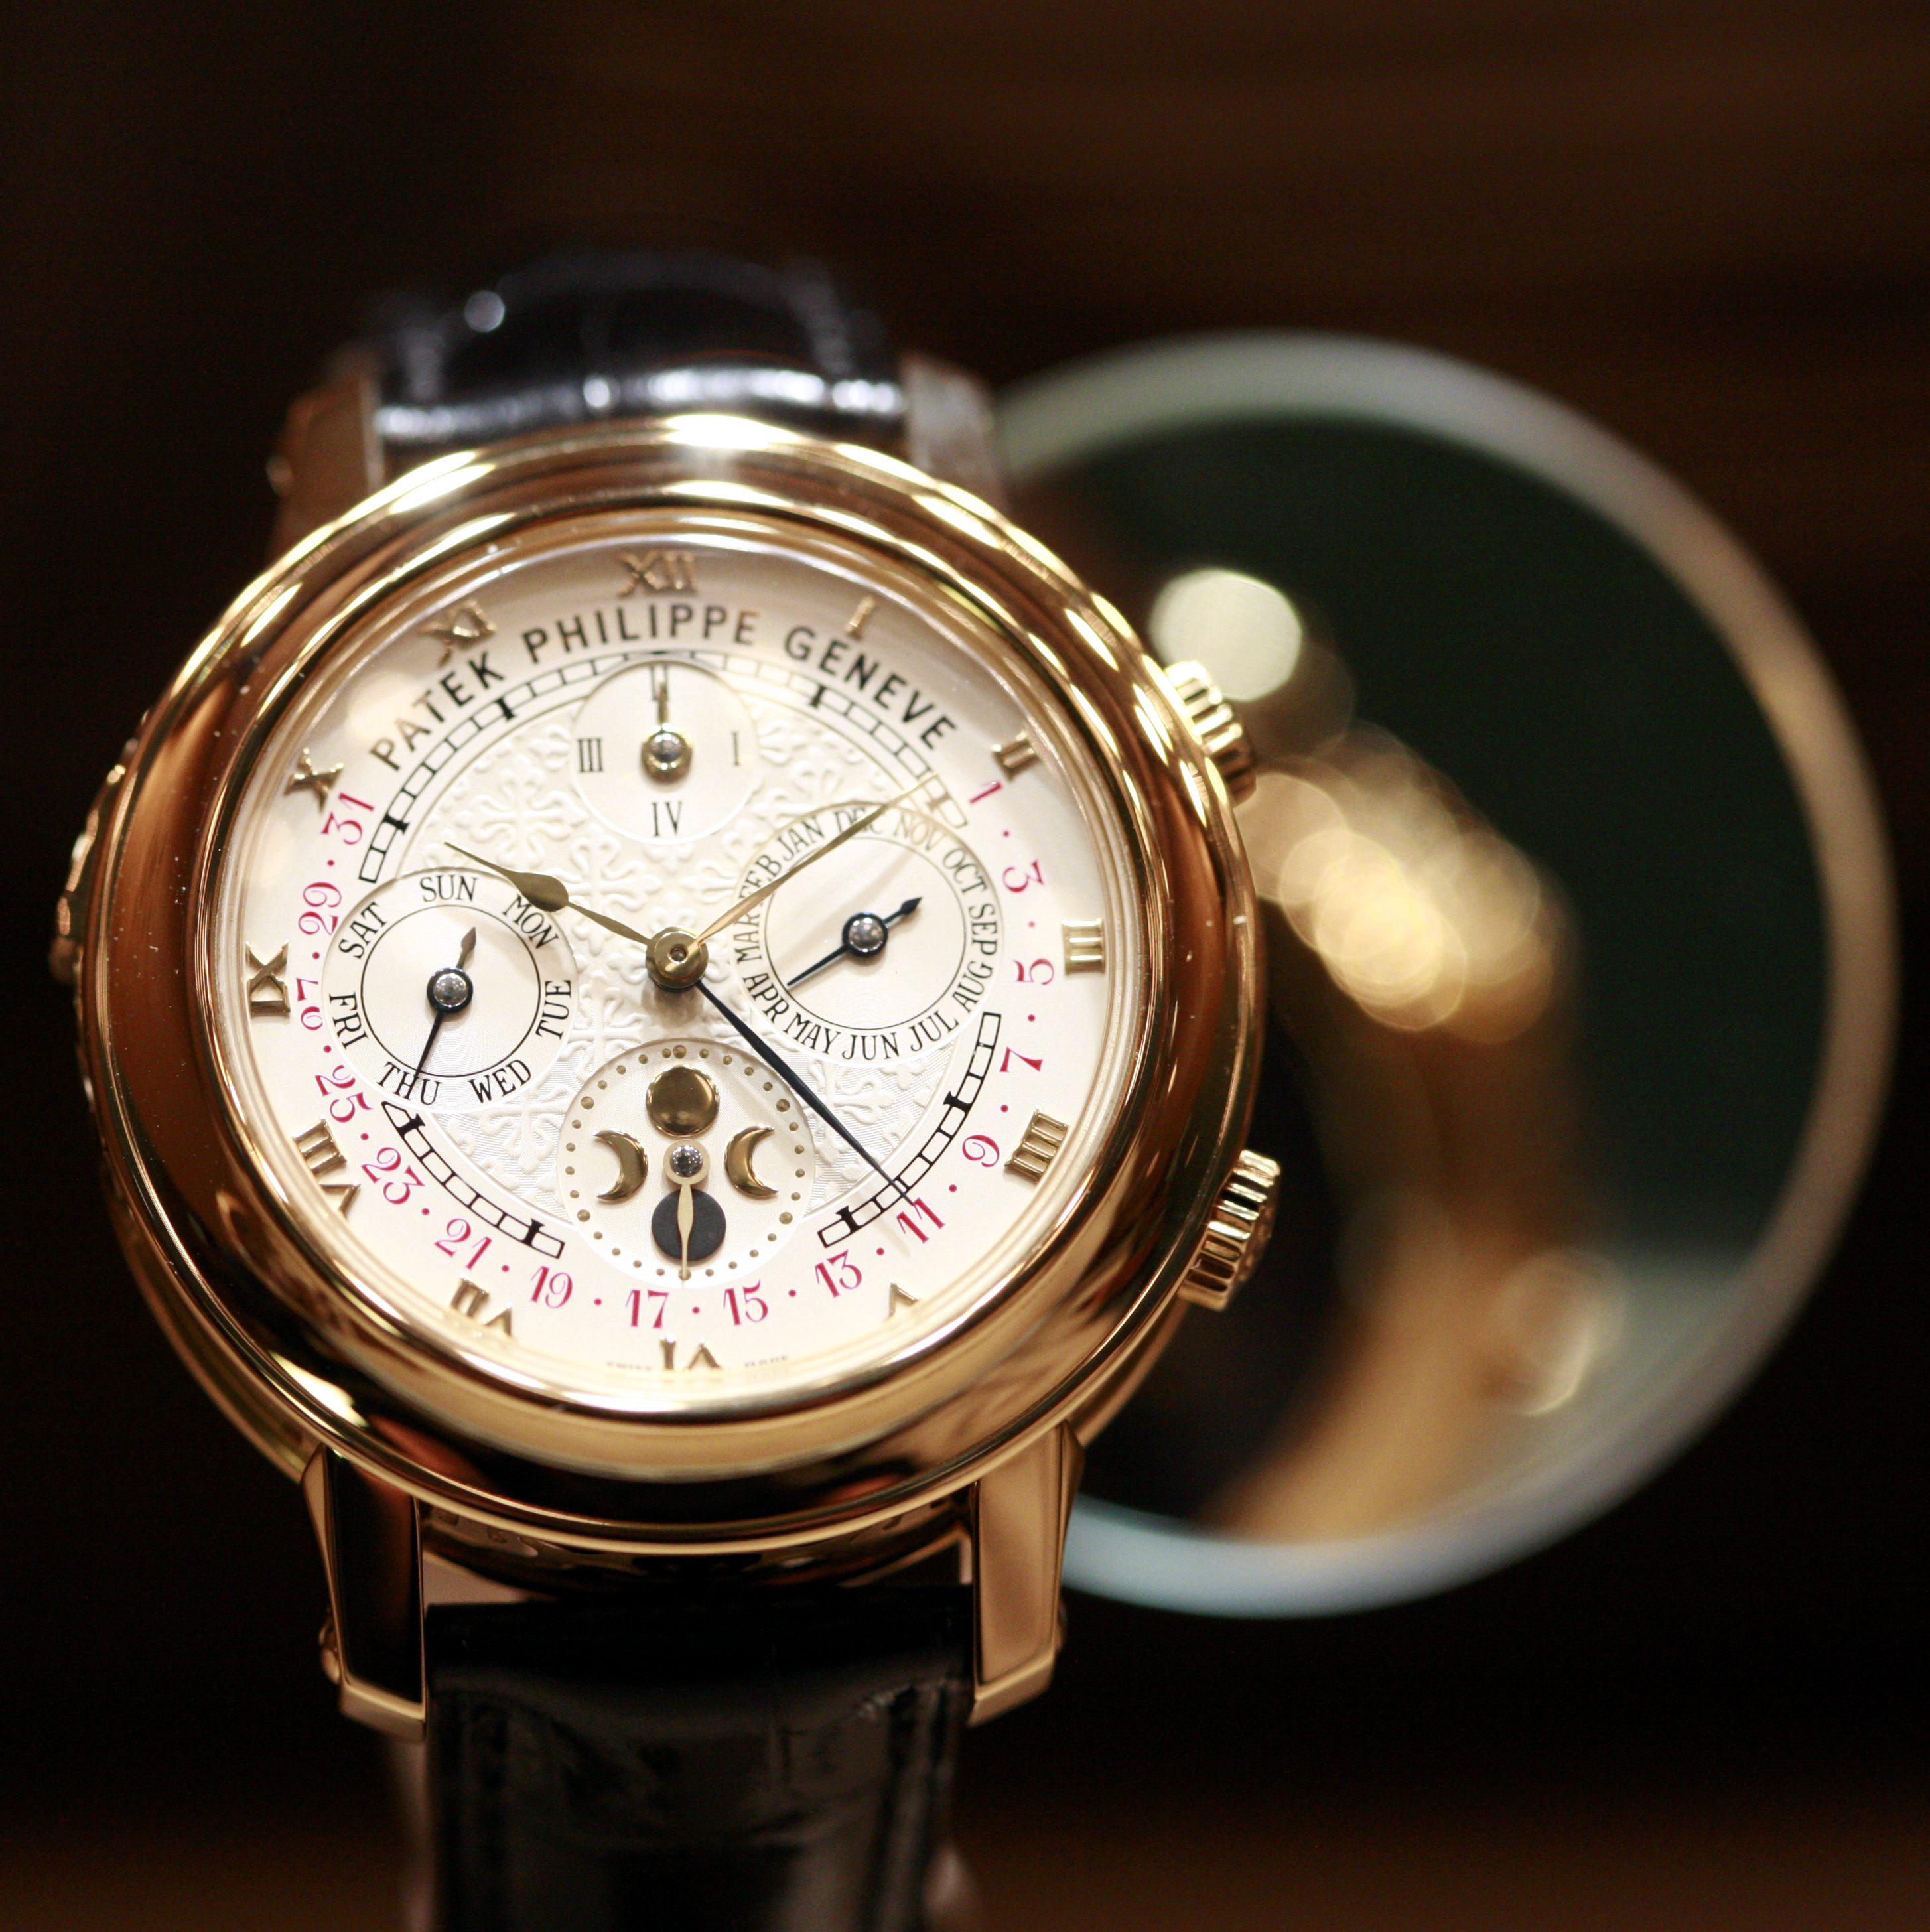 Owning a Patek Philippe: A Lifetime Investment for the Discerning Watch Enthusiast